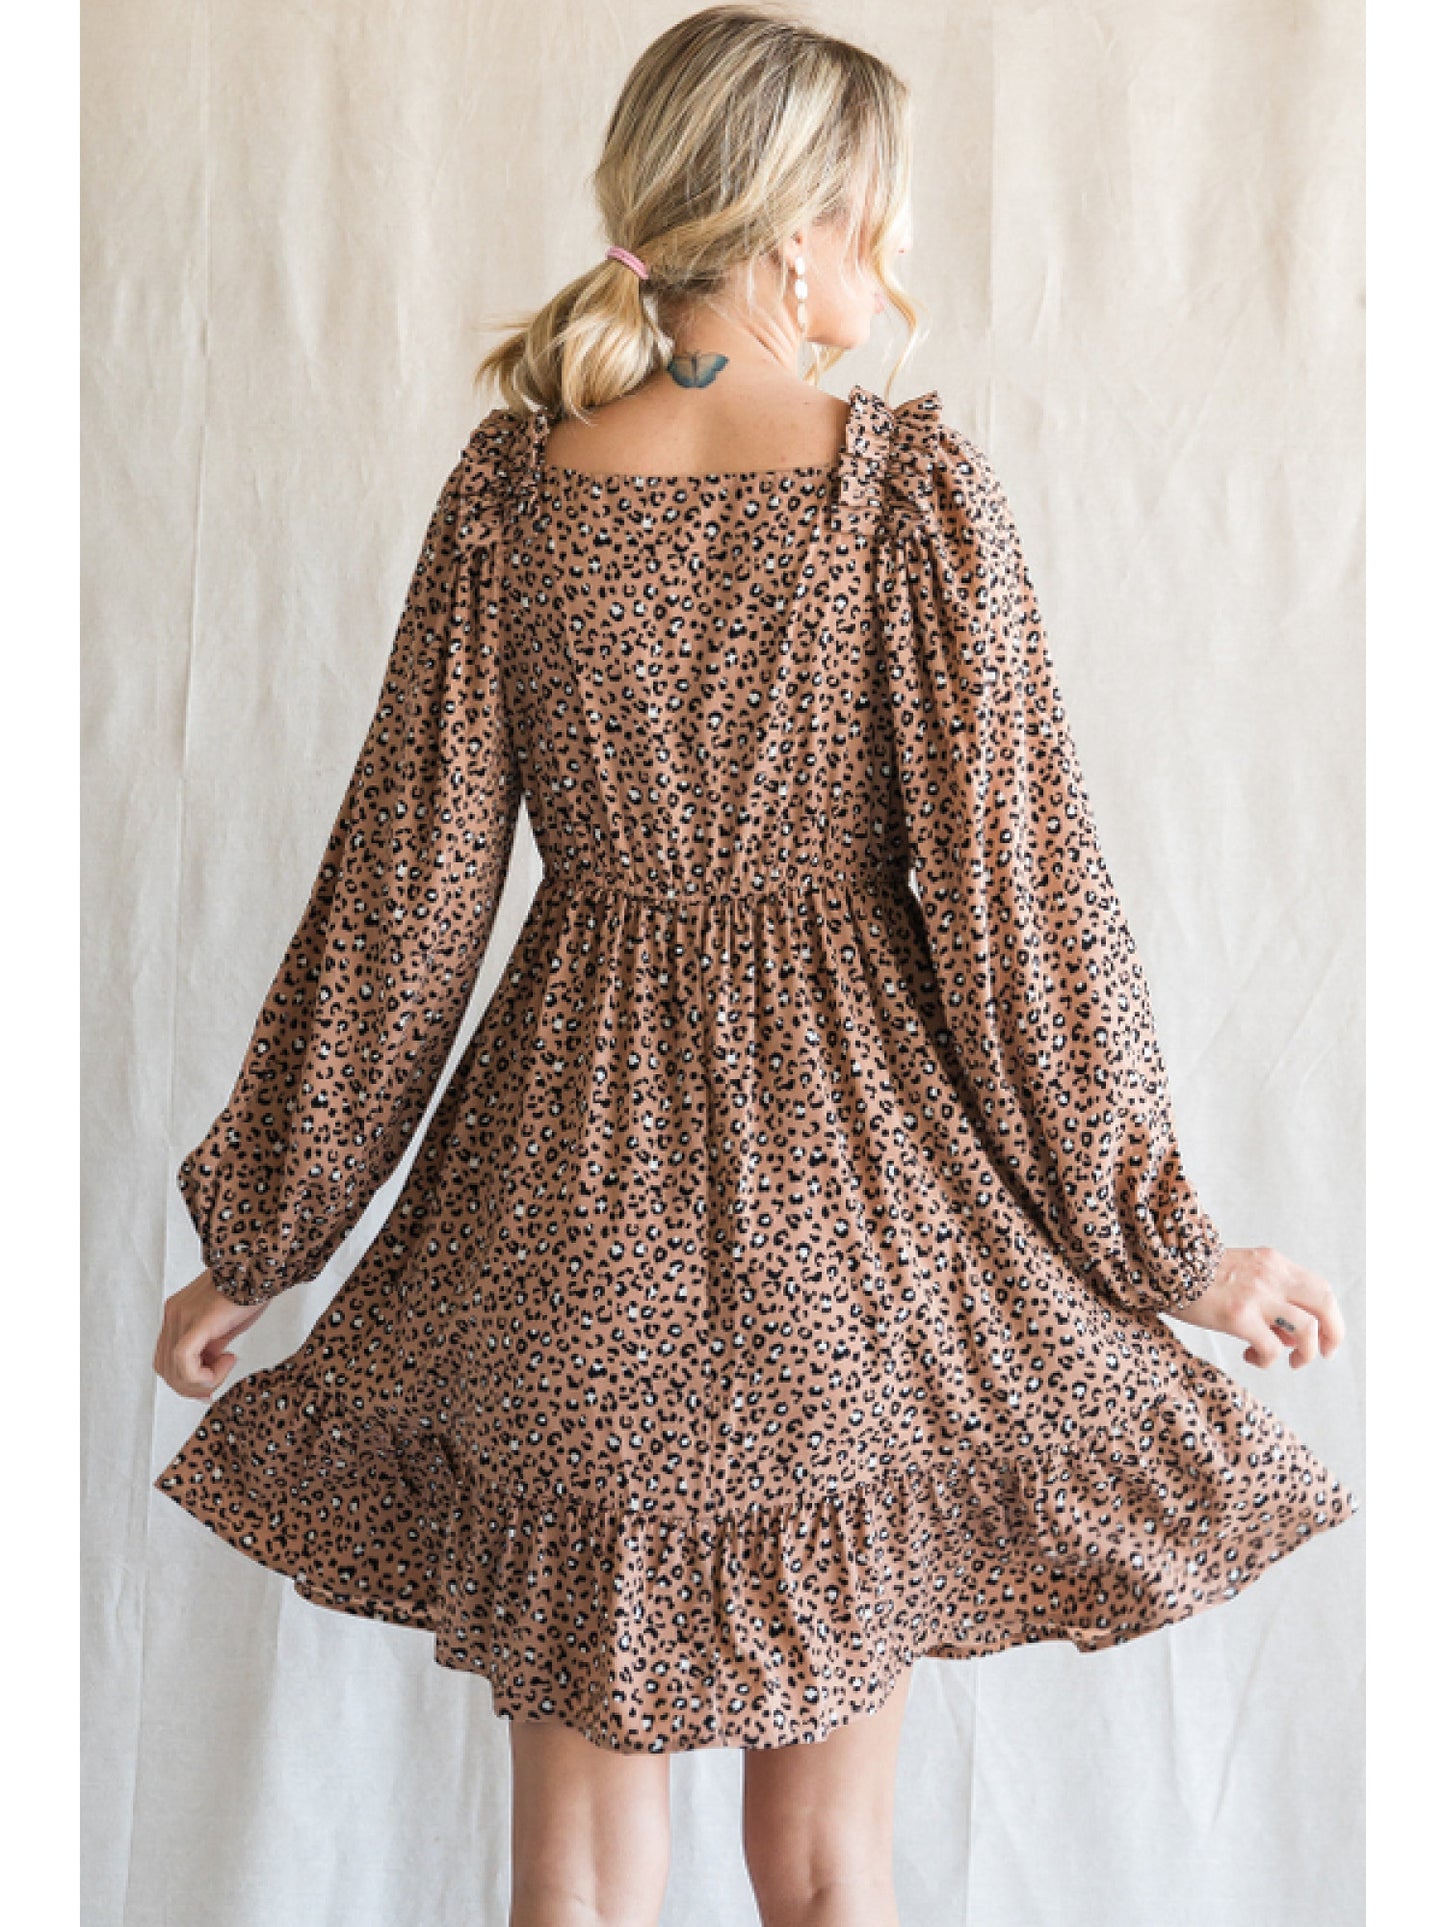 Leopard dress with frilled detail